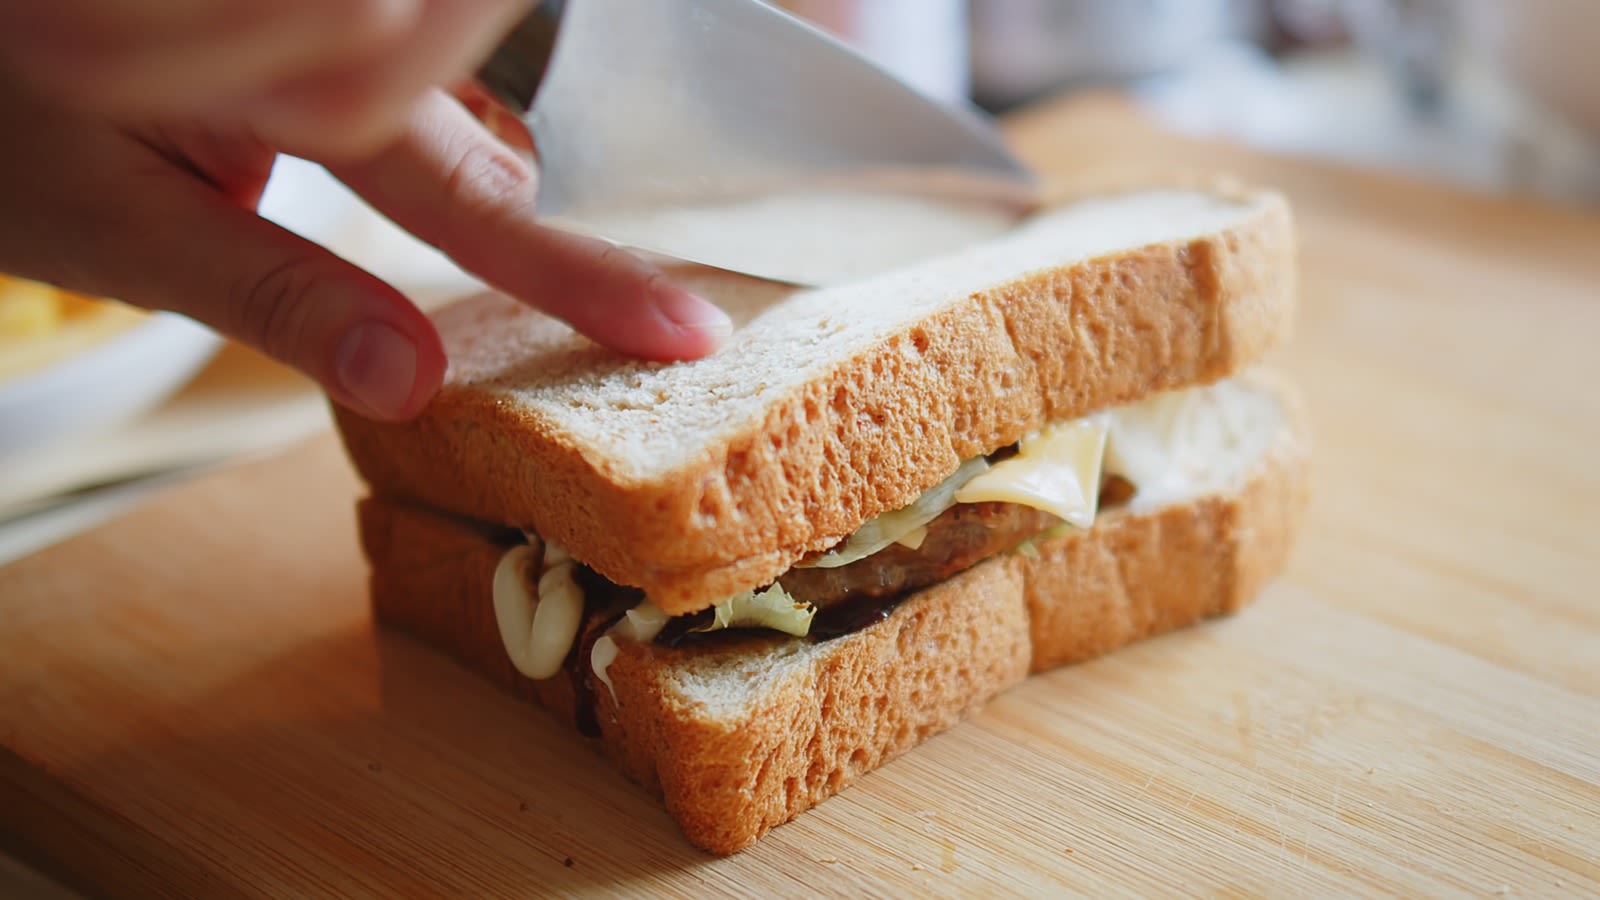 The Viral Y-Cut Sandwich Is The Best Thing Since Sliced Bread